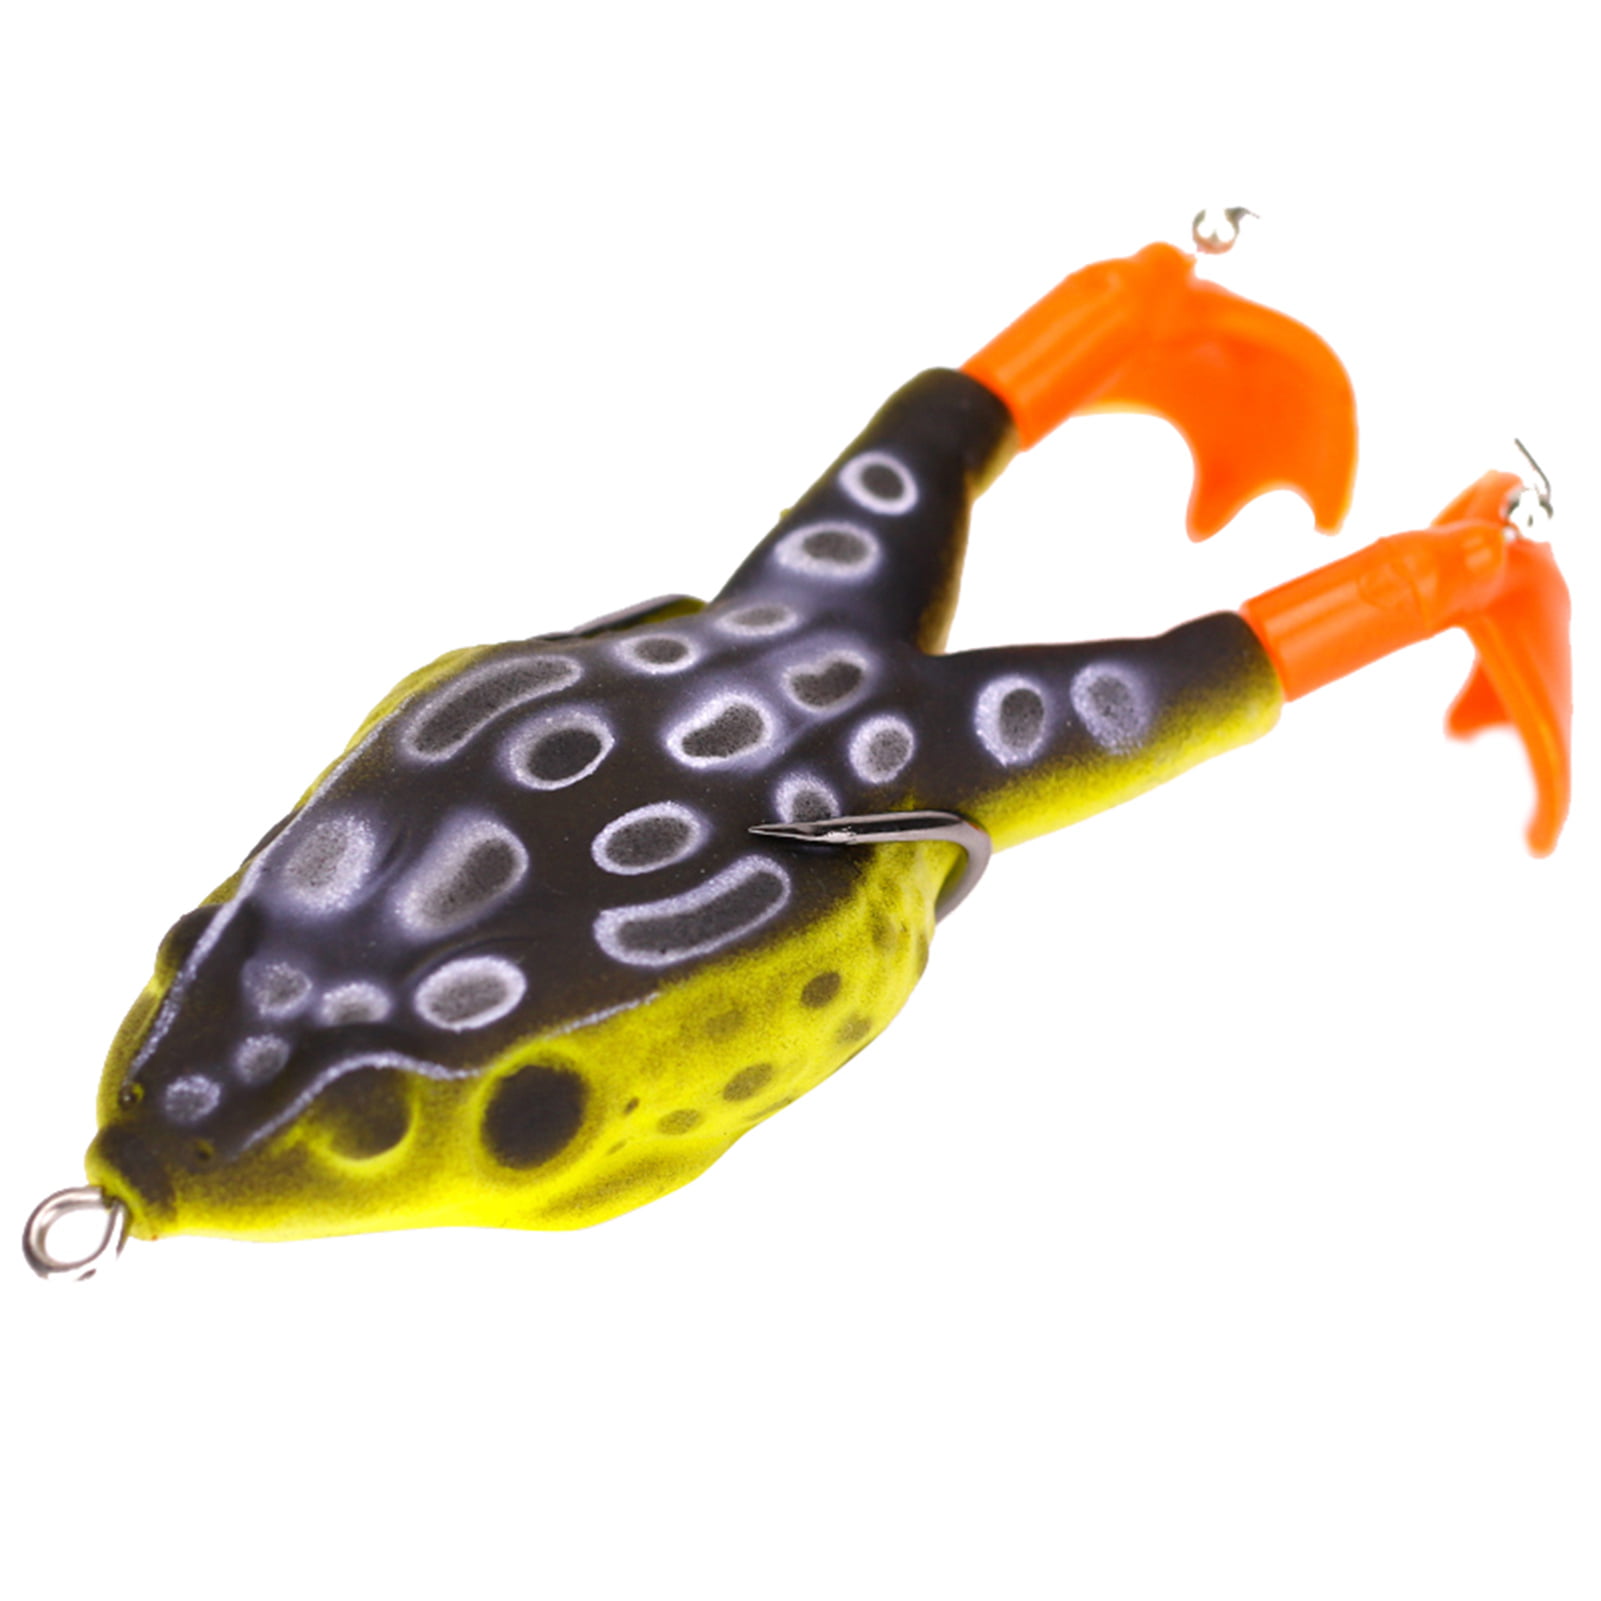 SANWOOD Soft Frog Bait Double Propellers Legs 3D Eyes 9cm Lifelike Silicone  Skin Pattern Frog Lure for Bass Snakehead Pike